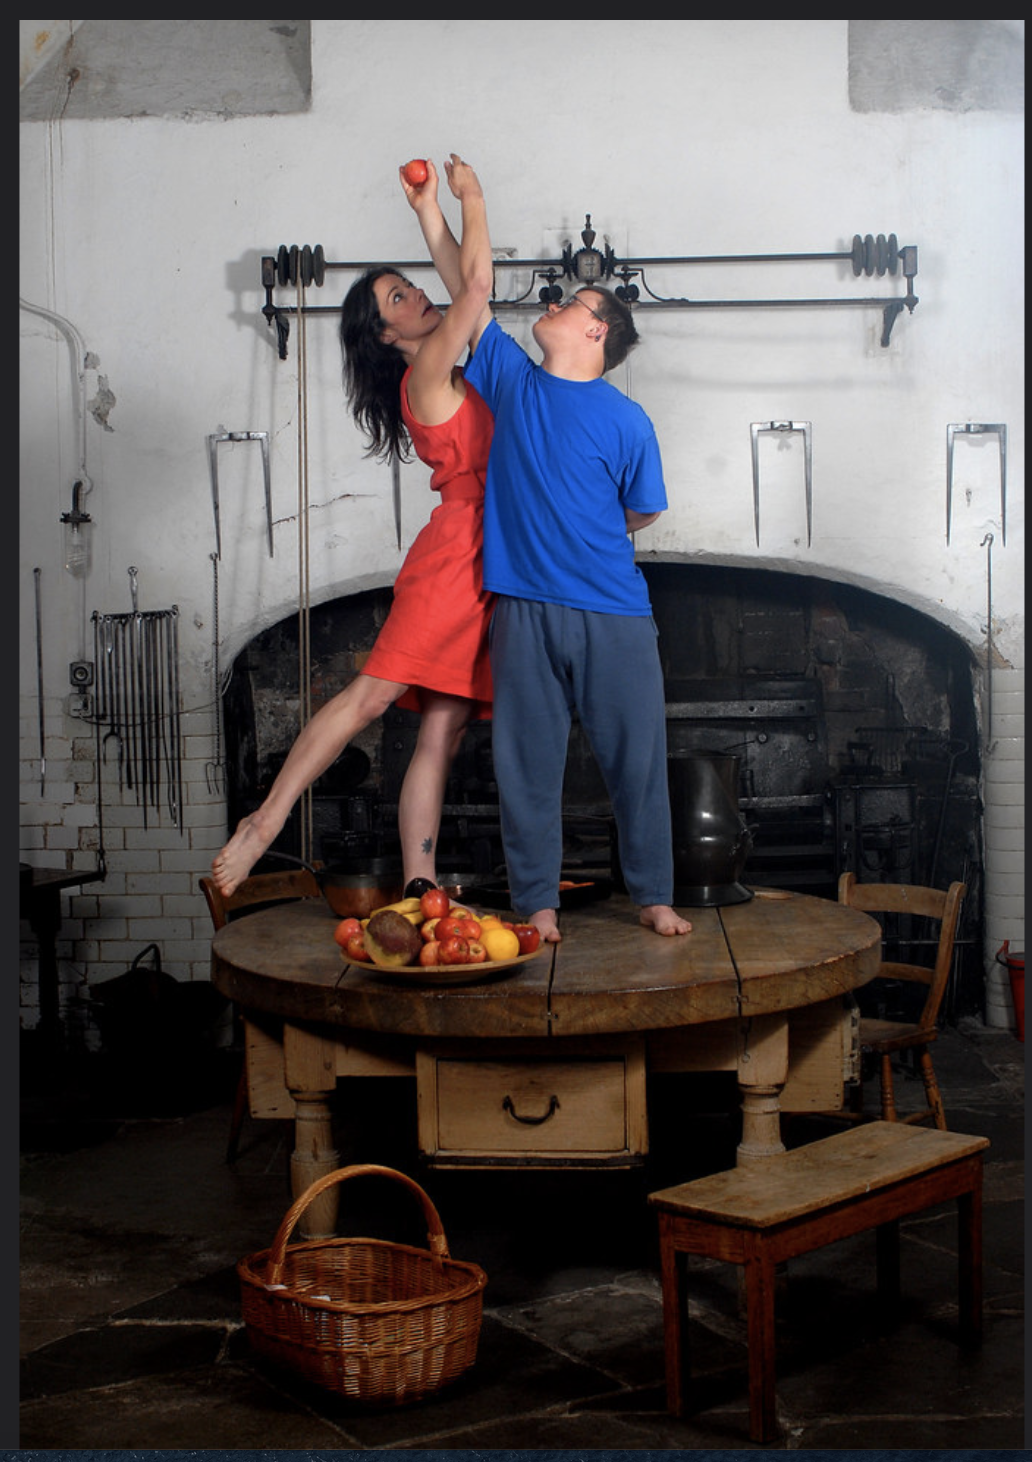 Two dancers stand on a big oak table in a castle kitchen. Their arms are entwined as they both reach up for a red apple. The female dancer has long dark hair. She reaches her right leg away gracefully. She is wearing a short-sleeved to-the-knee bright orange dress. The male dancer has light brown short hair and glasses. He is wearing a royal blue t-shirt and darker blue tracksuit bottoms. They look like a painting from the past.